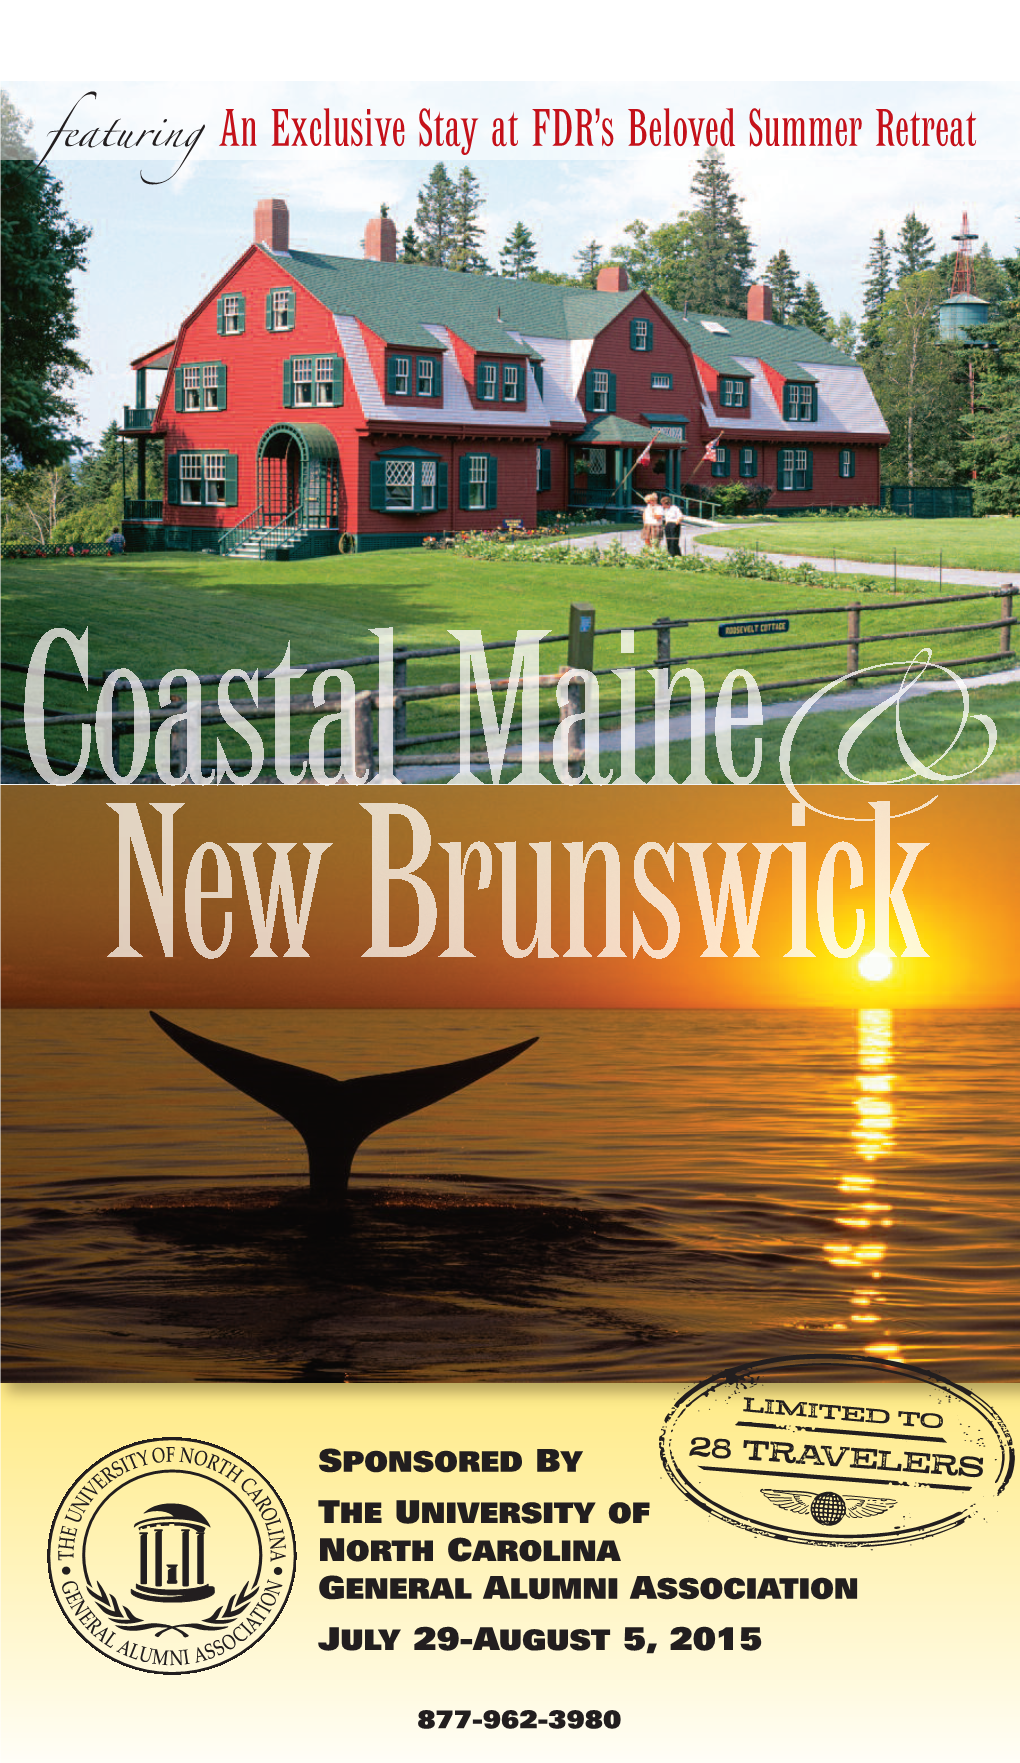 Reserve Your Trip to Coastal Maine & New Brunswick Today